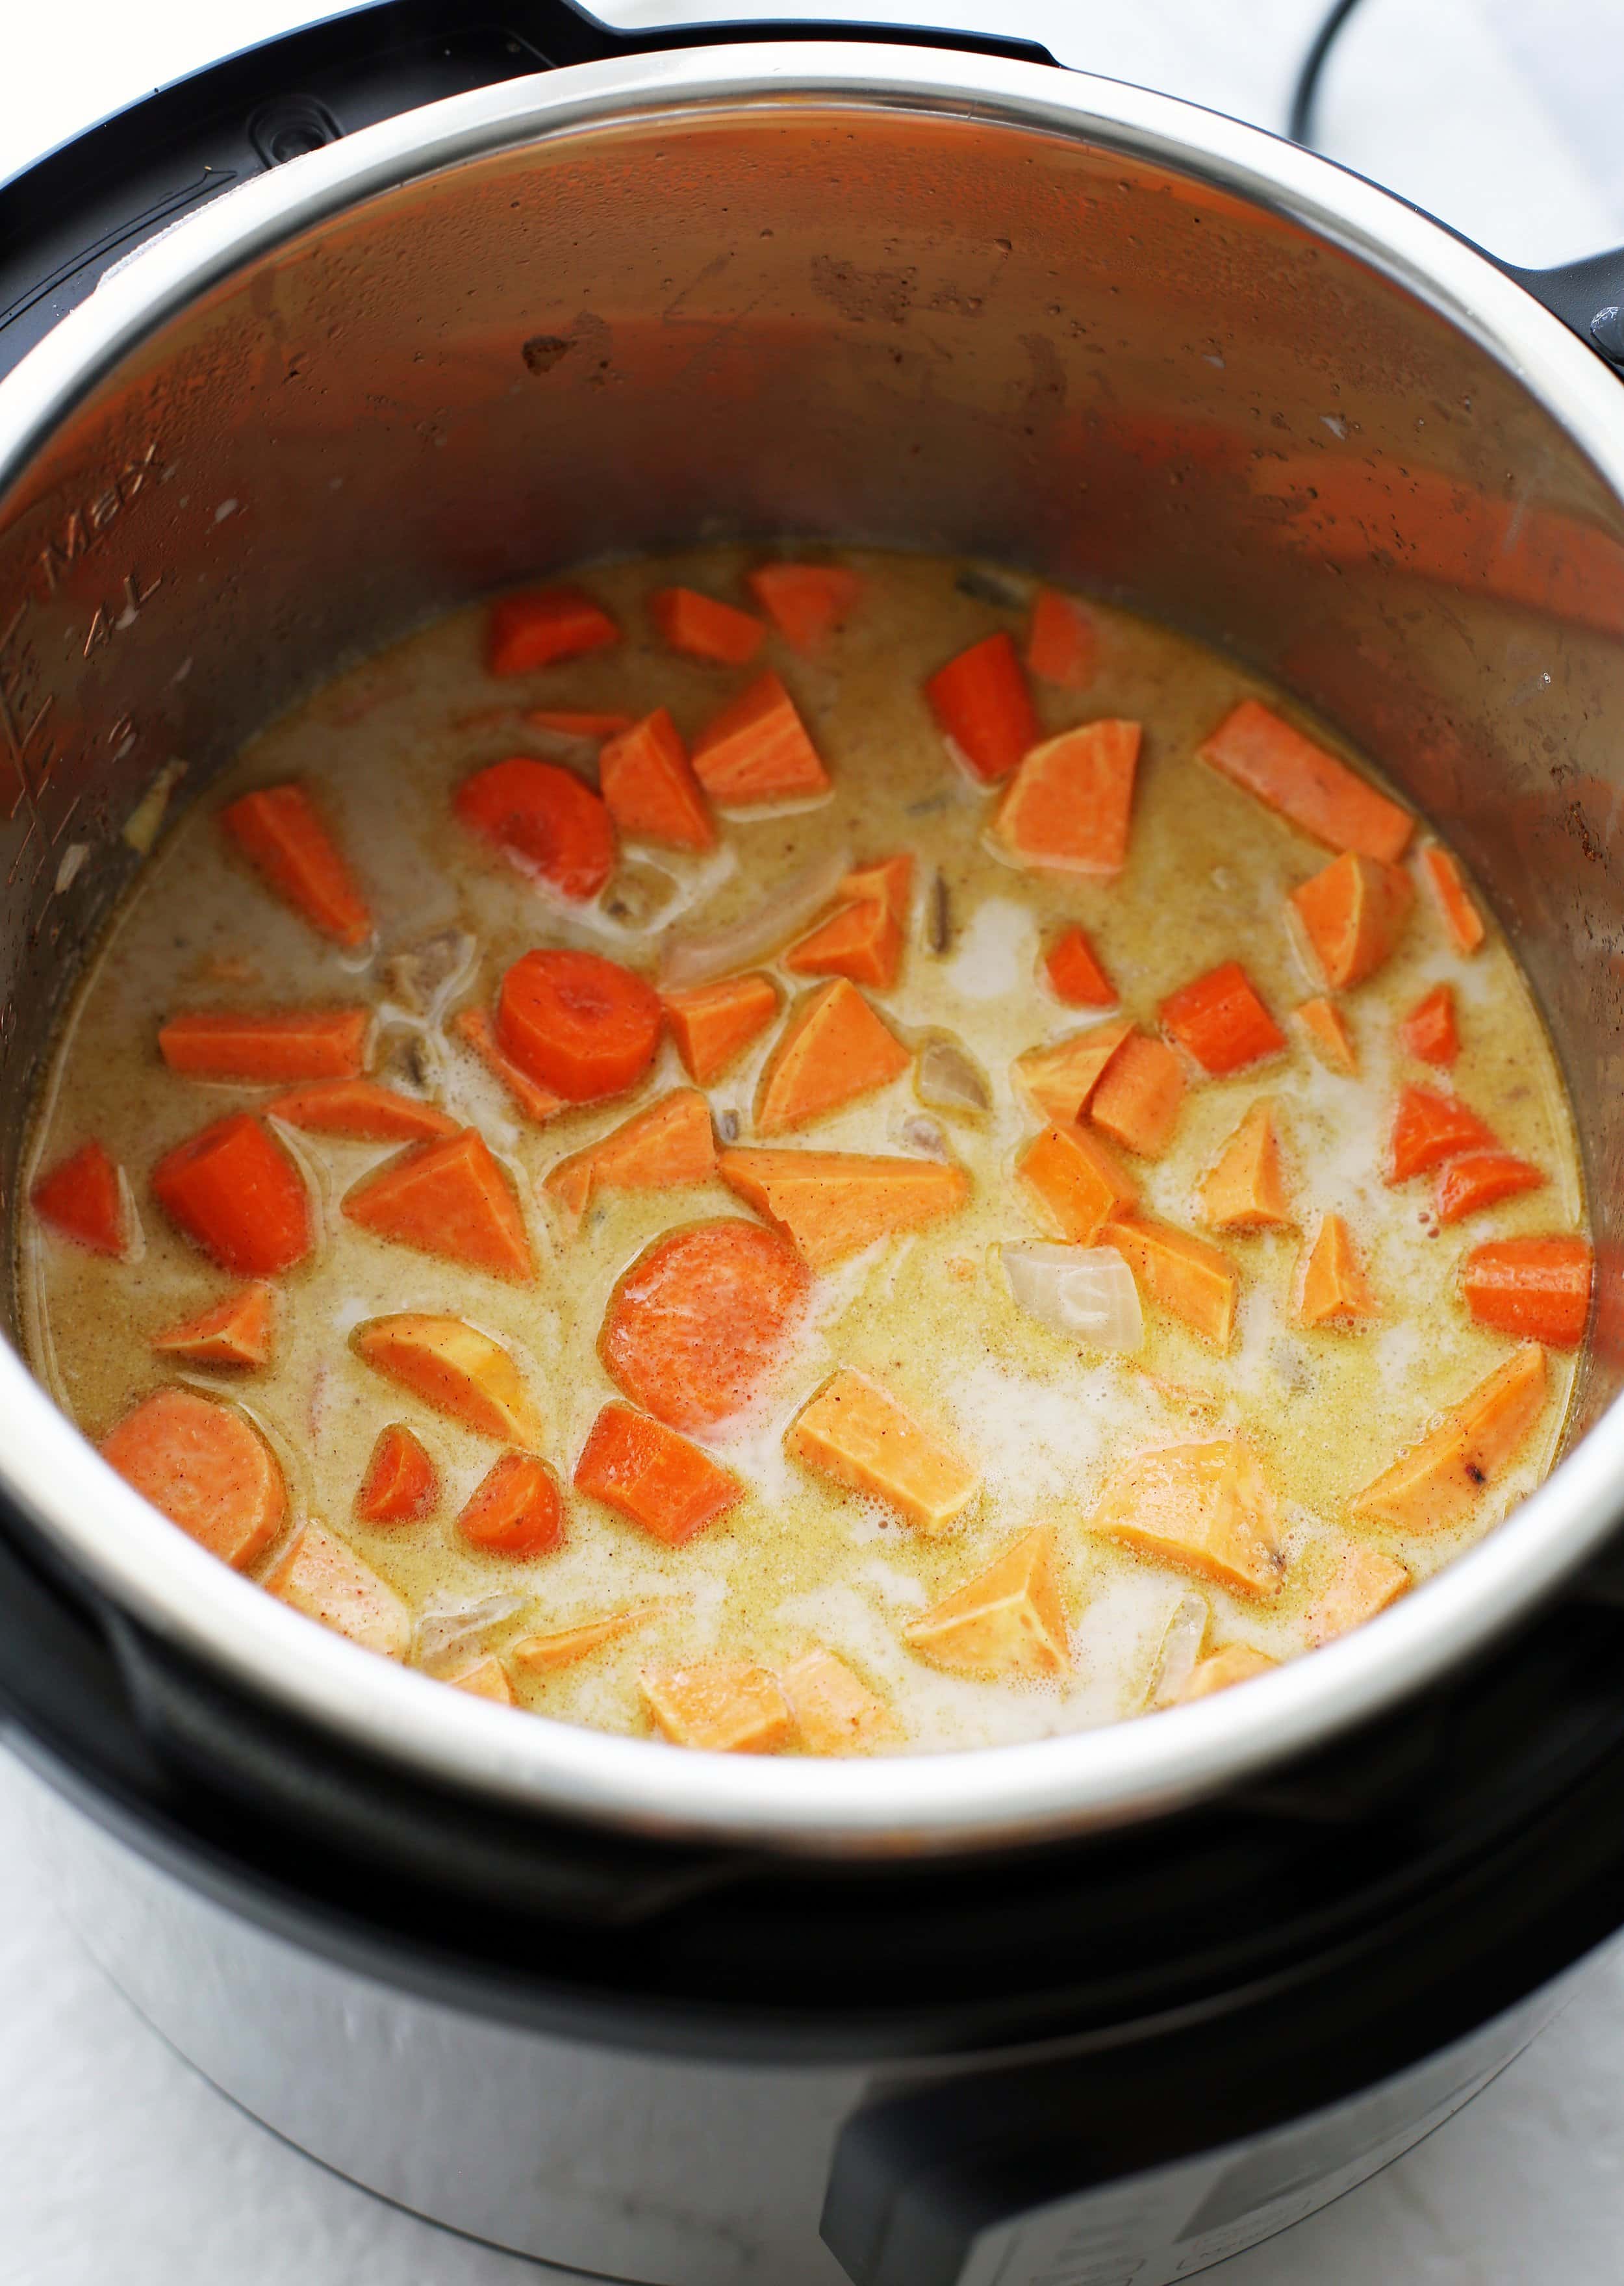 Sautéed onions, garlic, ginger, sweet potato, carrots, coconut milk, and spices in an Instant Pot.